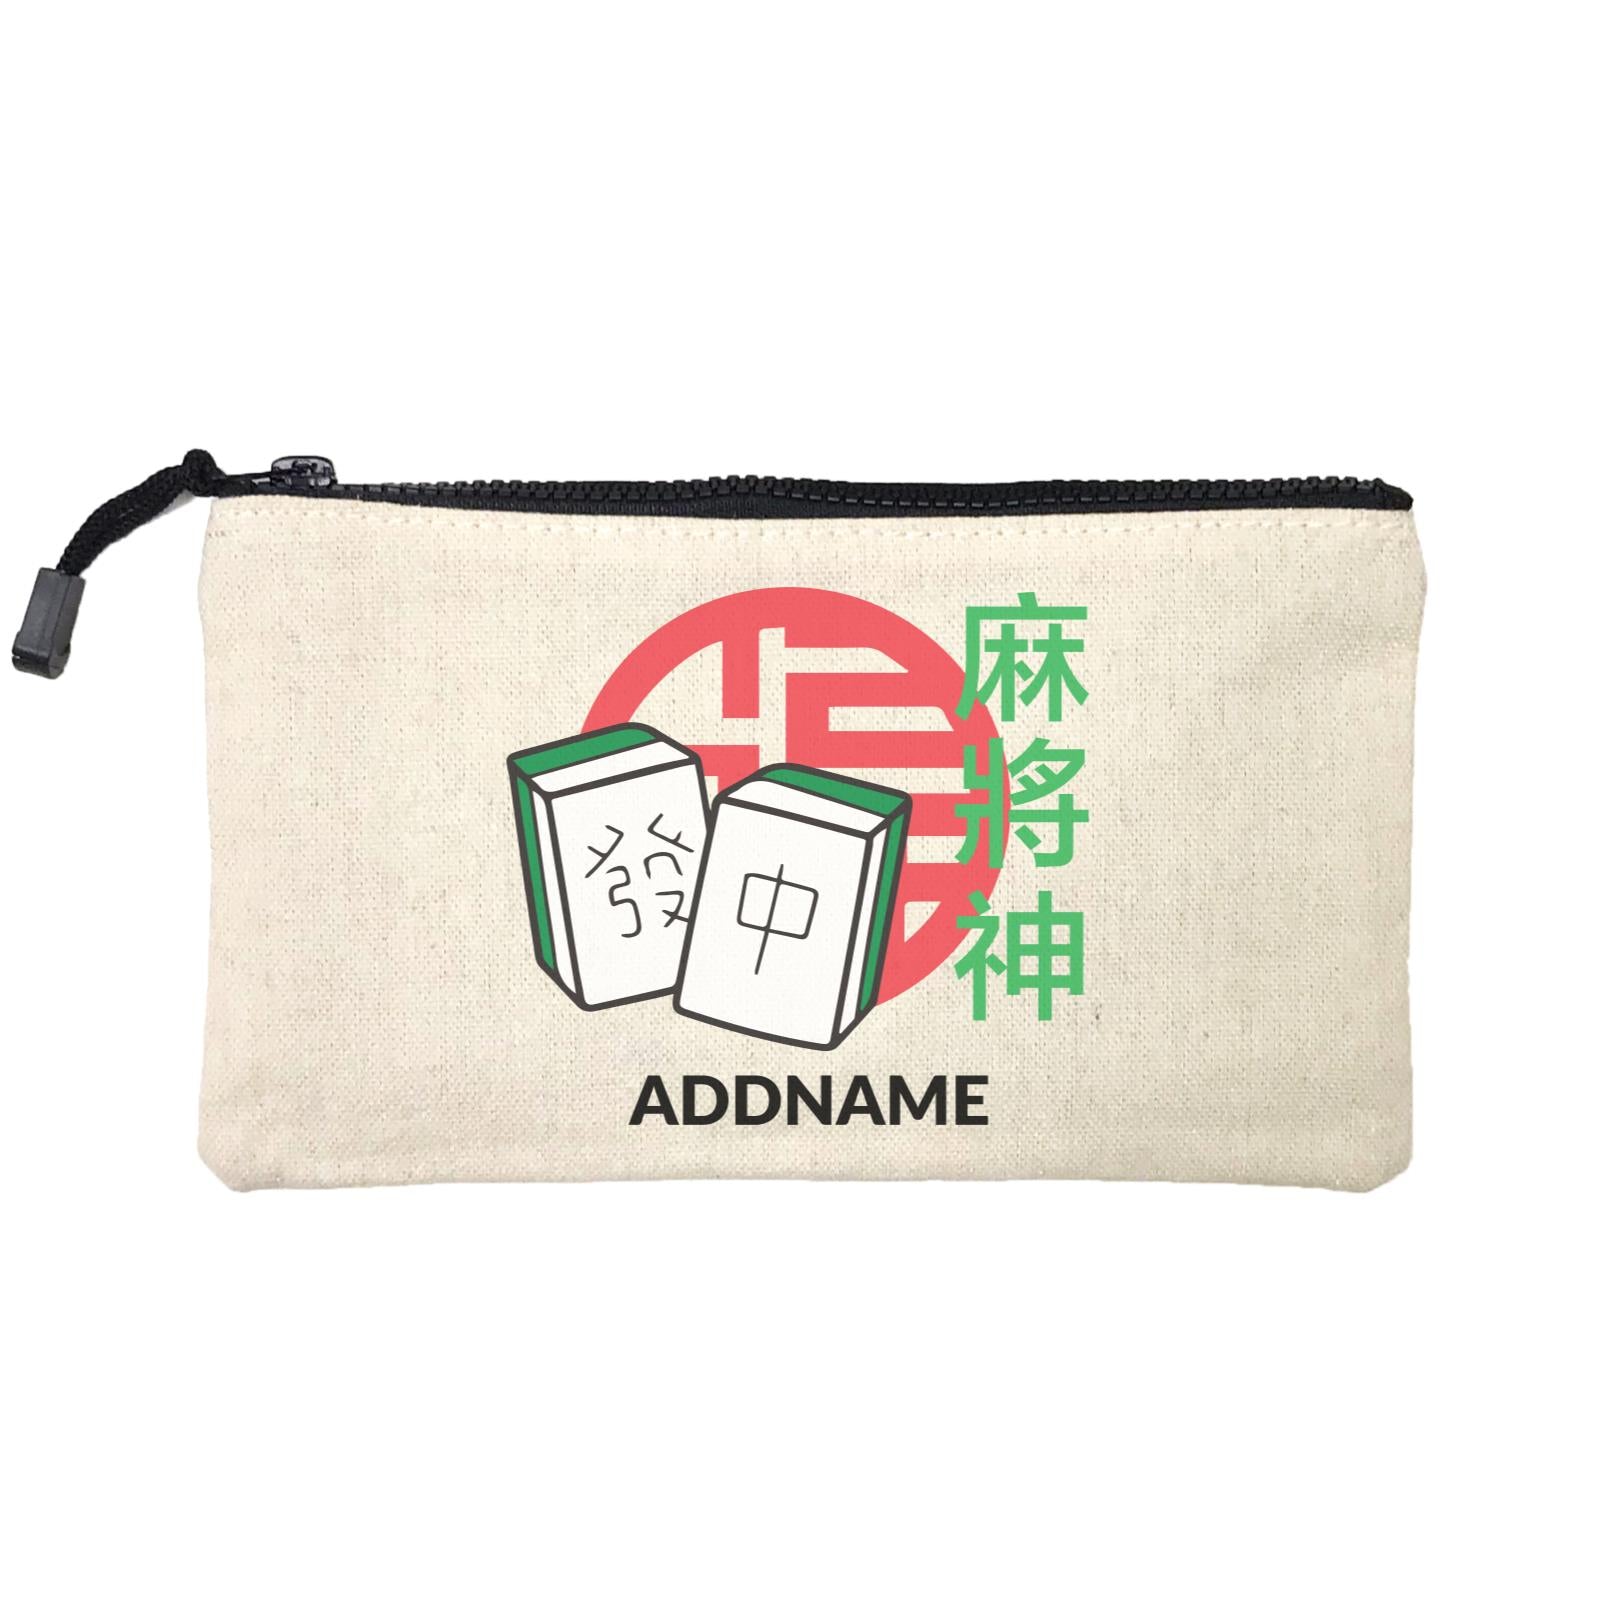 Chinese New Year God of Mahjong Addname SP Stationery Pouch